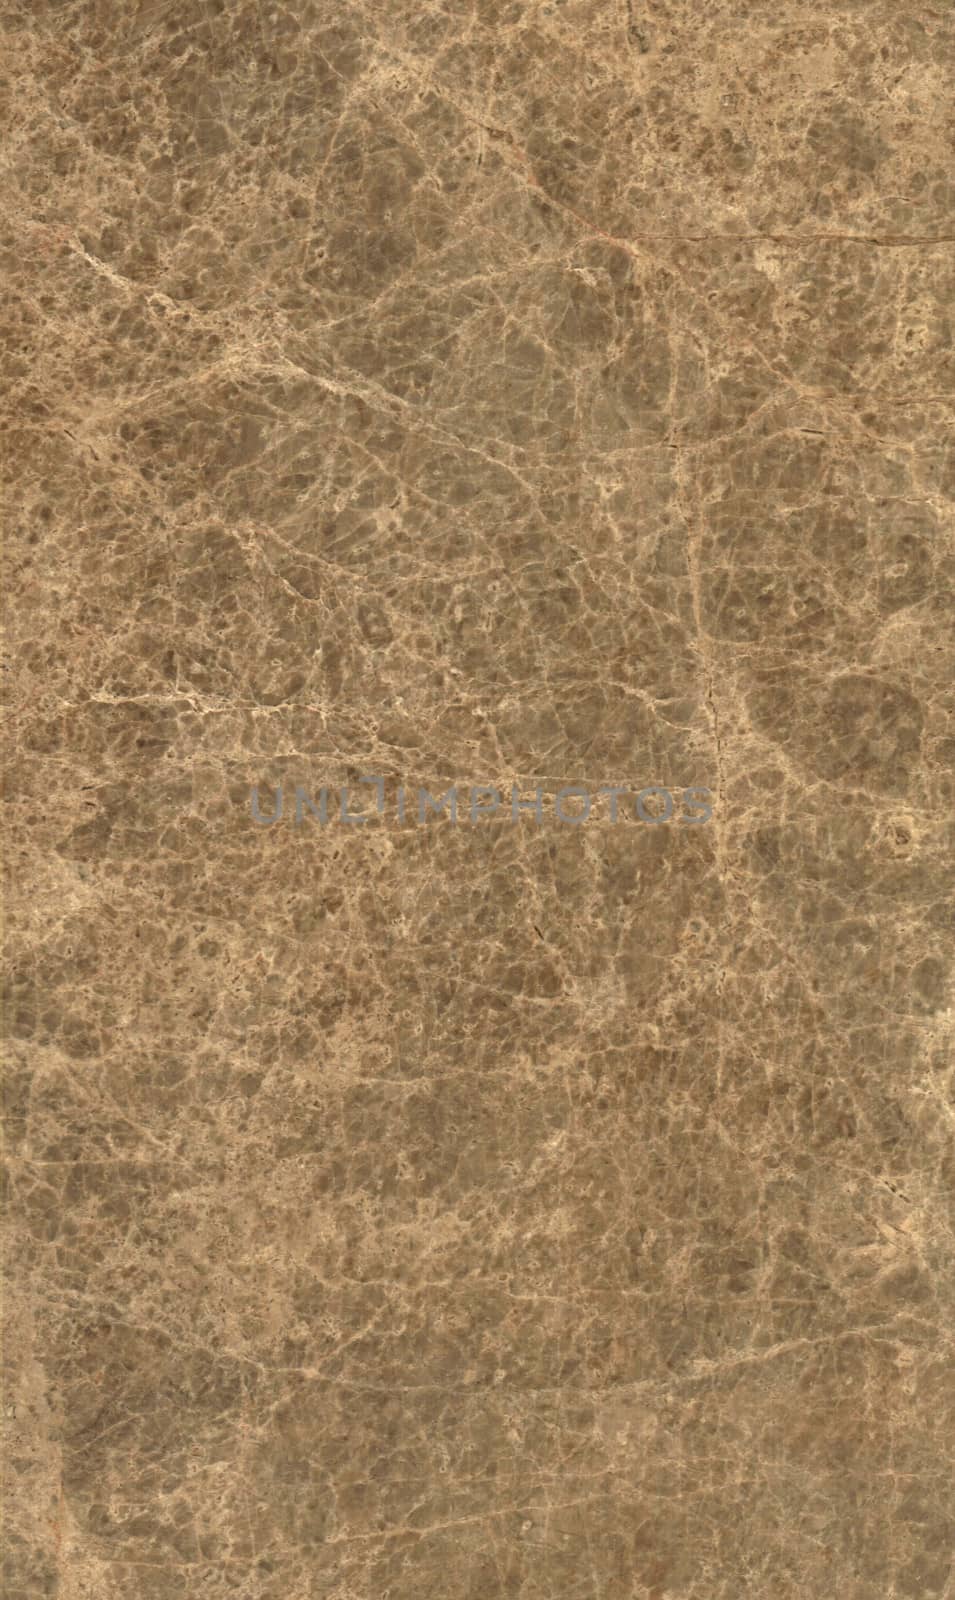 Brown marble texture background (High resolution scan)